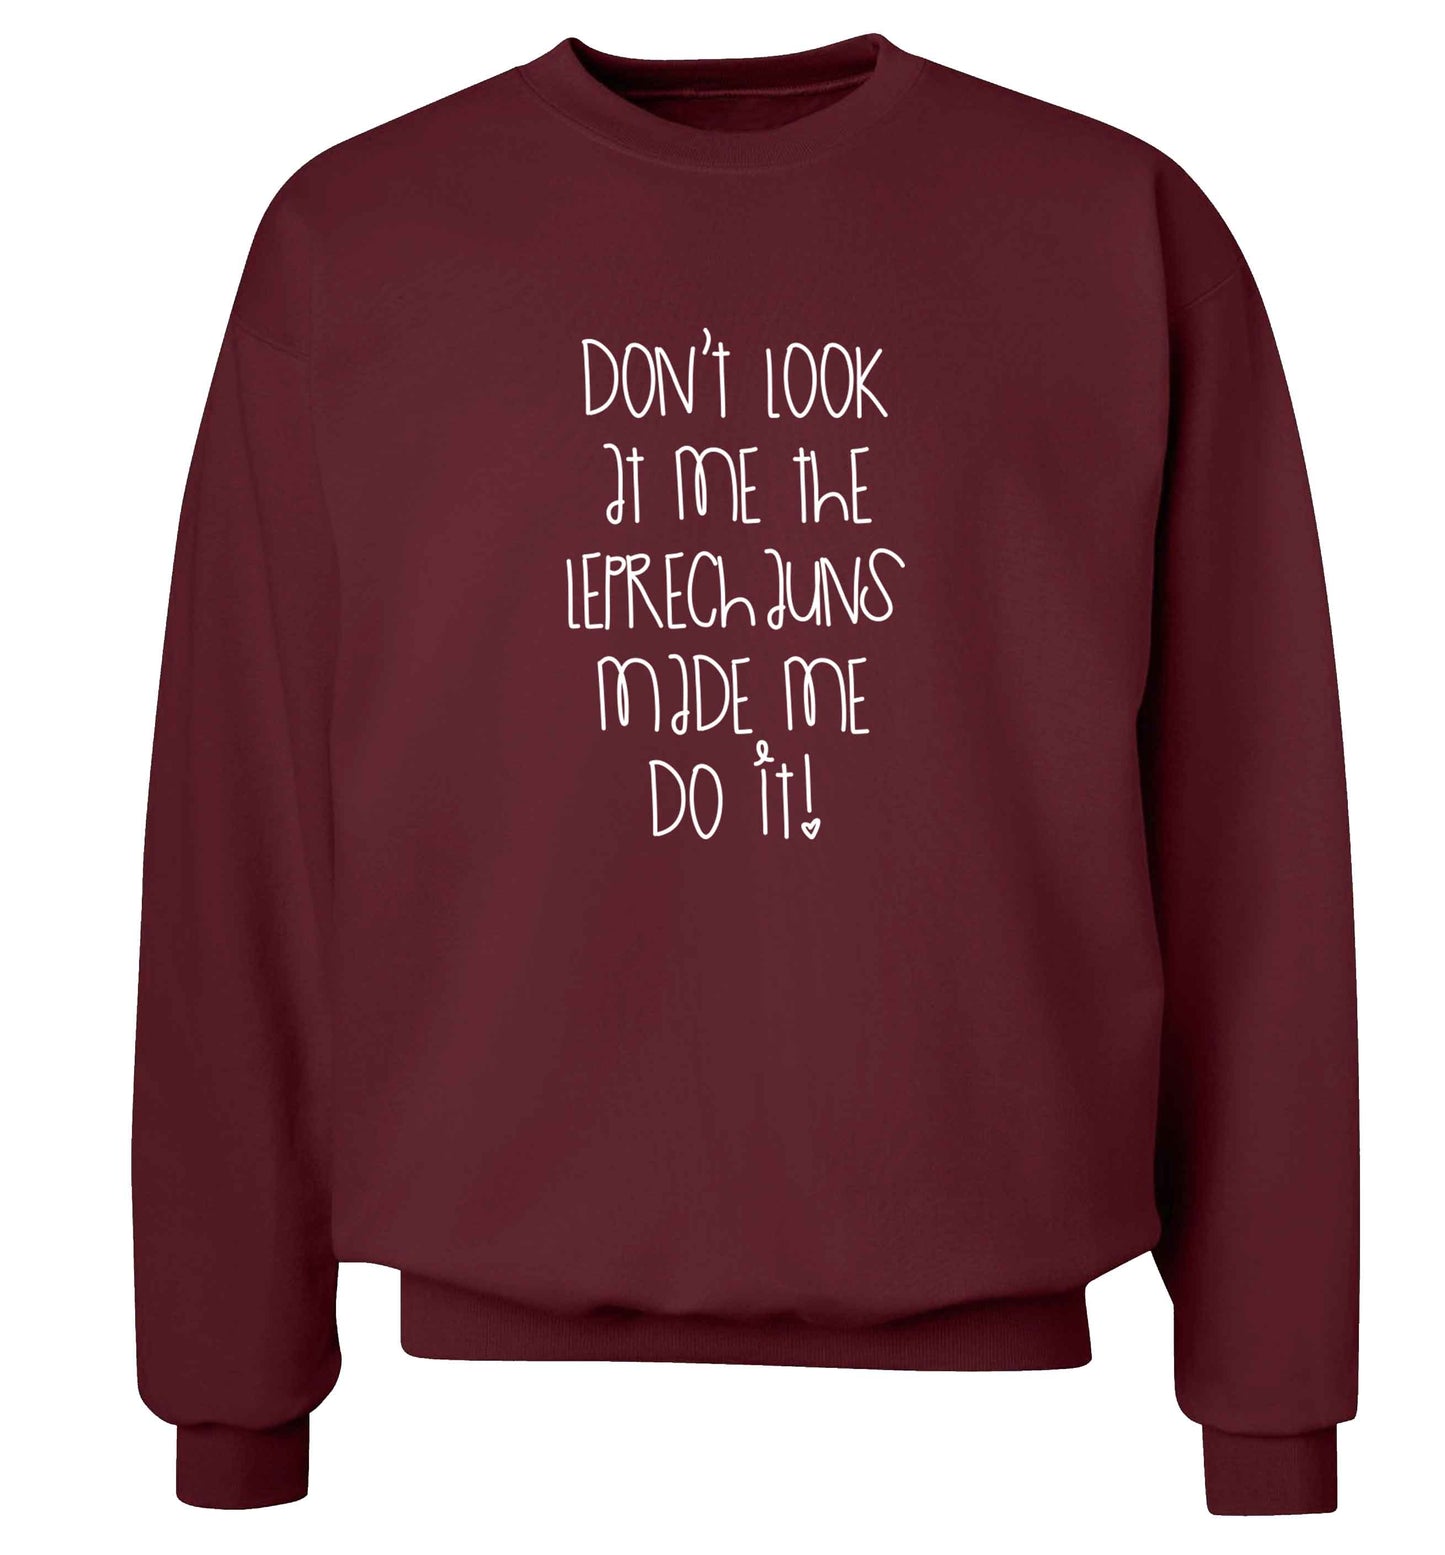 Don't look at me the leprechauns made me do it adult's unisex maroon sweater 2XL